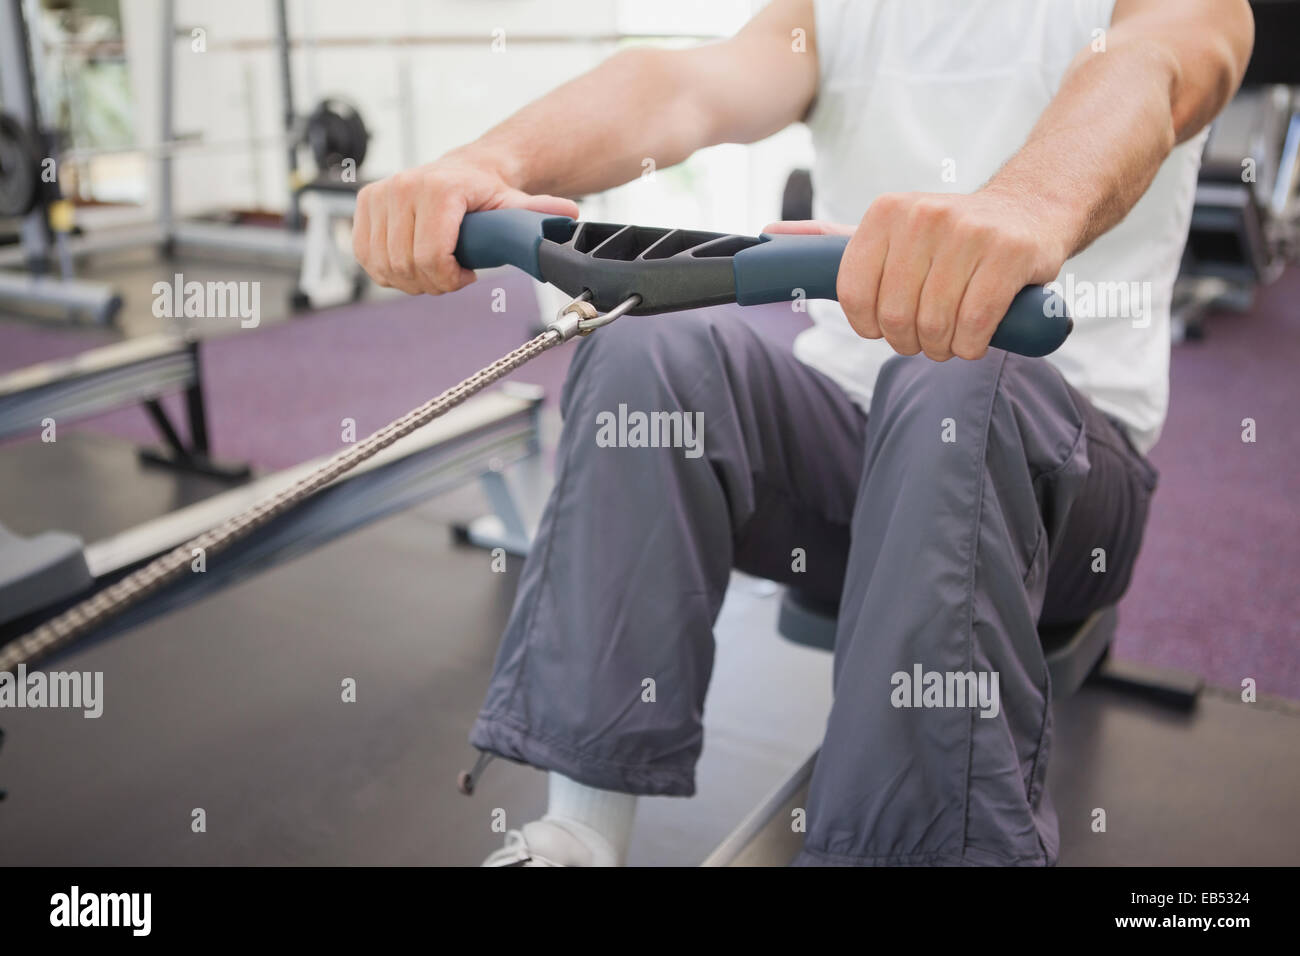 Fit man working out on rowing machine Stock Photo